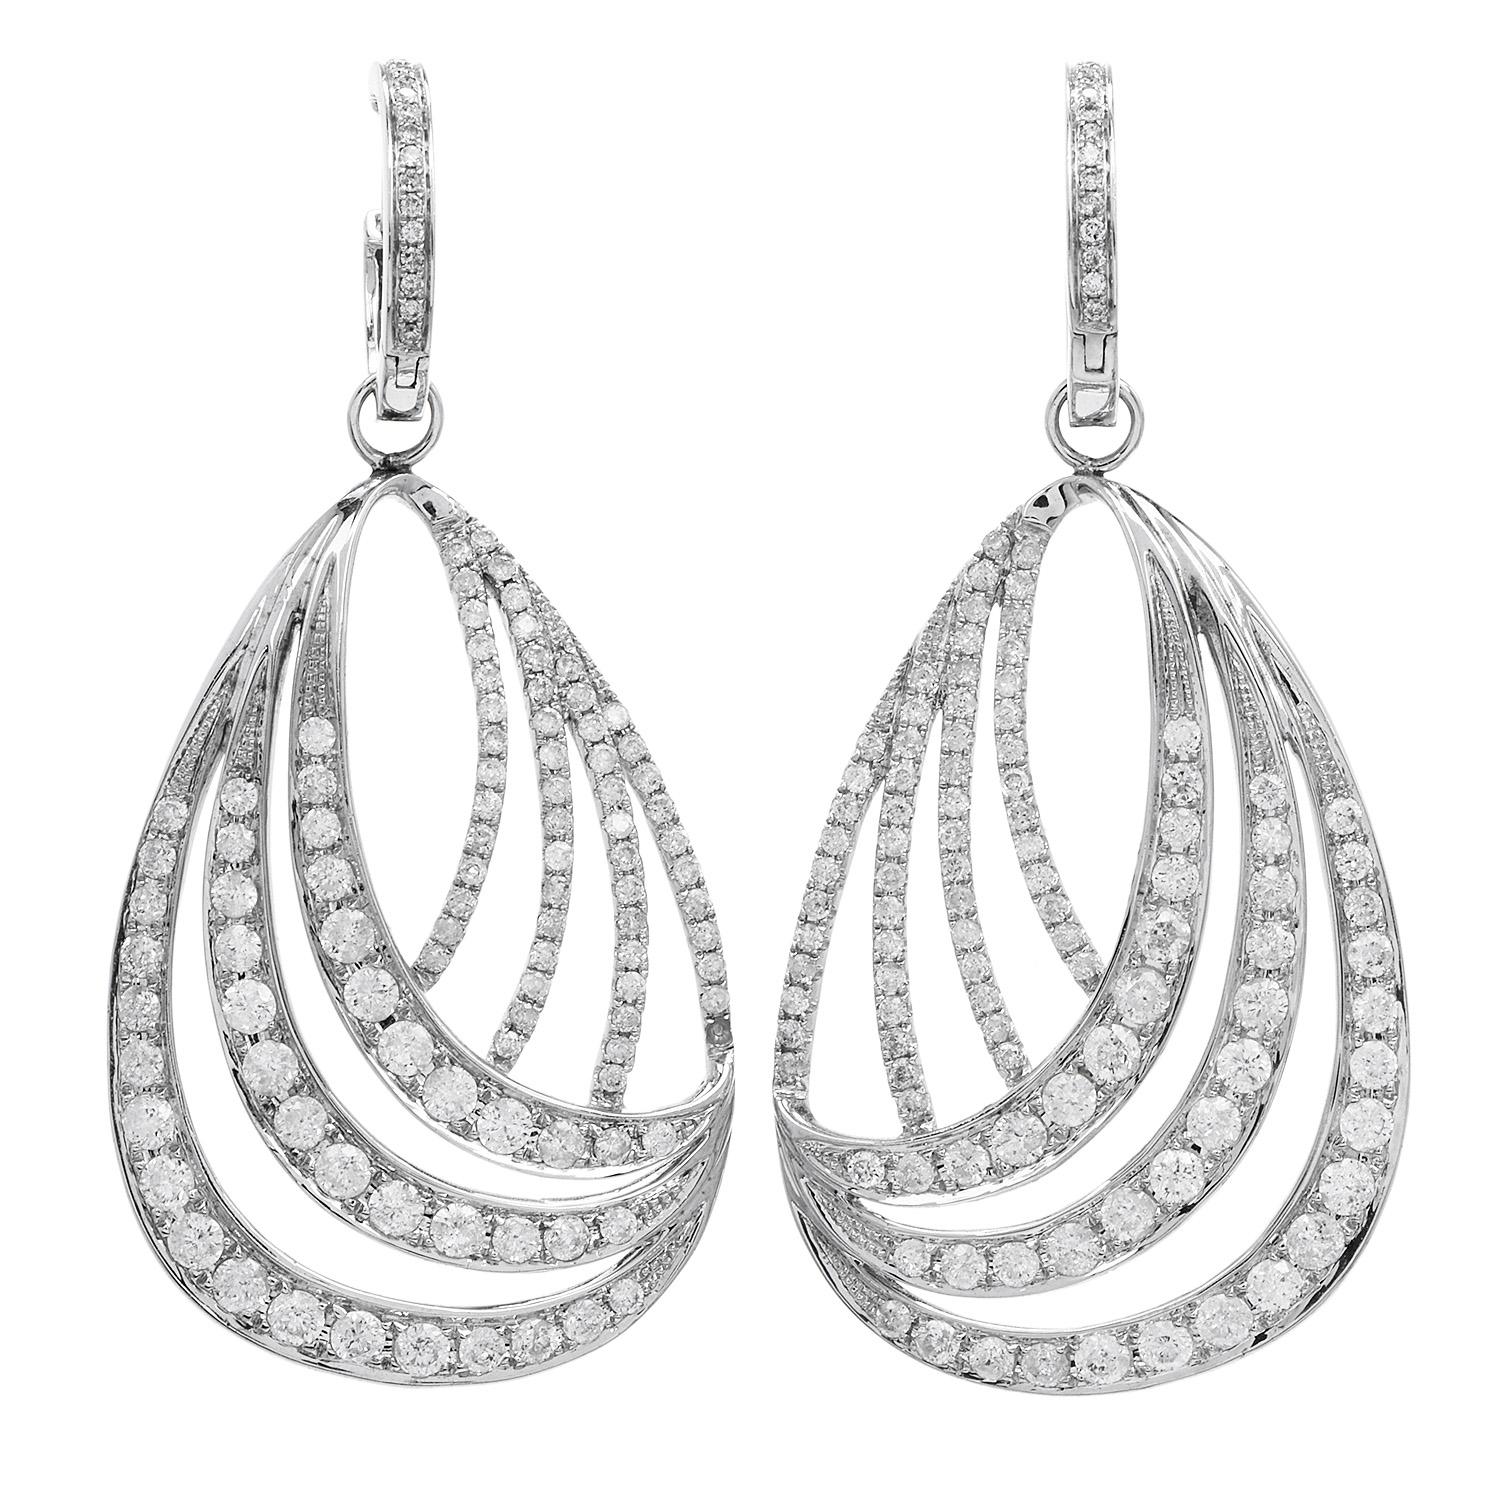 These Modern crossover design dangle drop earrings are shining bright!

Crafted in solid 14K White Gold, 

The open style earrings have two diamond-accented hoops with removable dangle jackets, for day & nightwear, two pairs in one!

Accented by 248